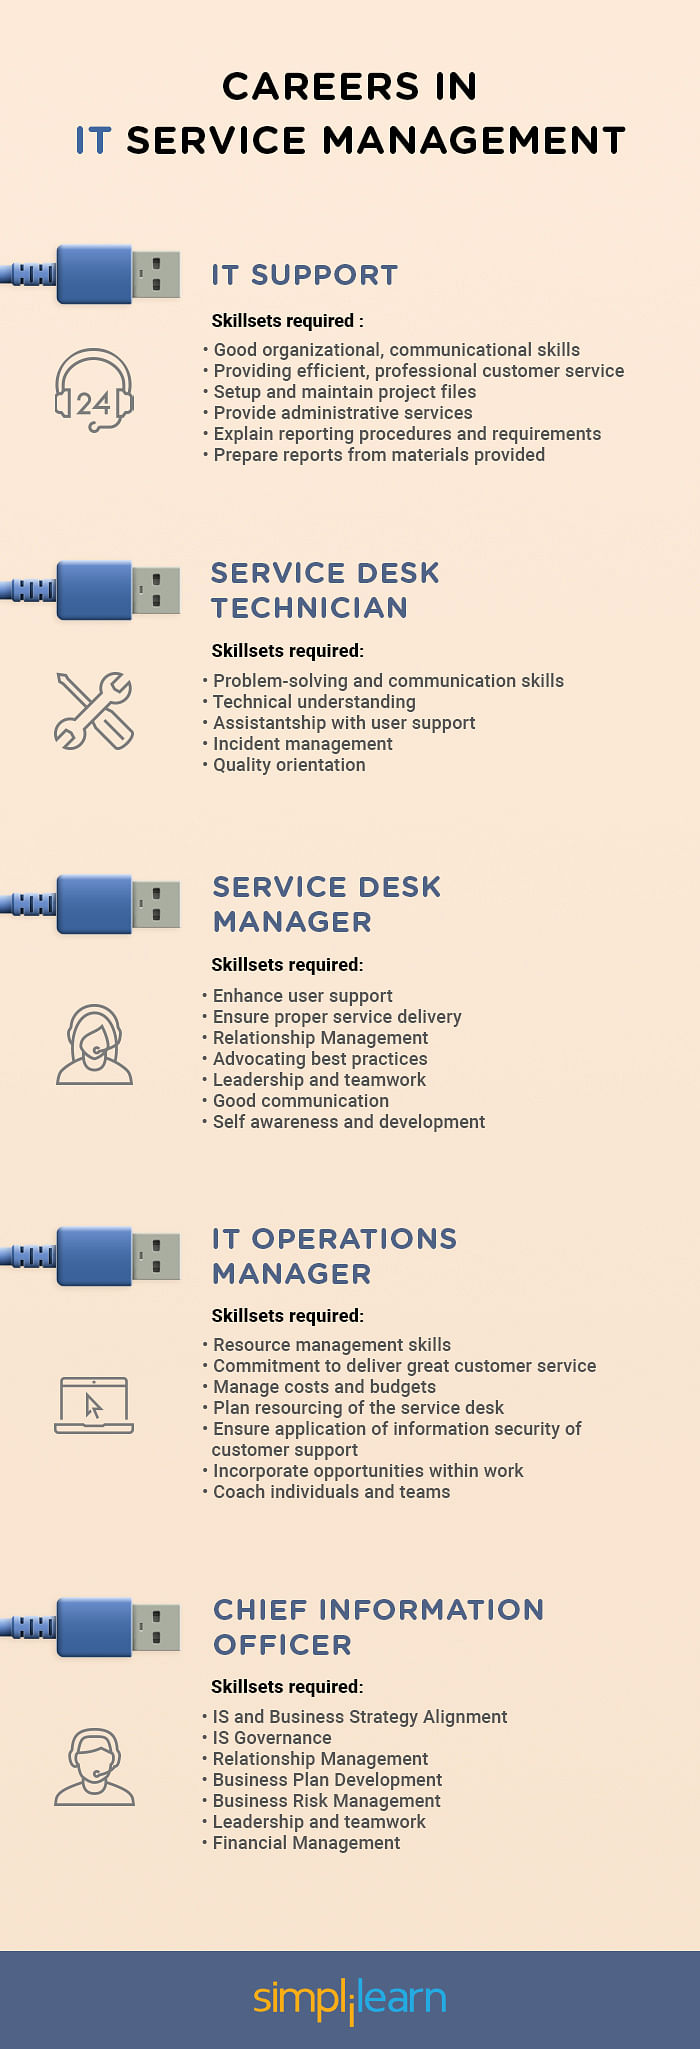 Careers In IT Service Management